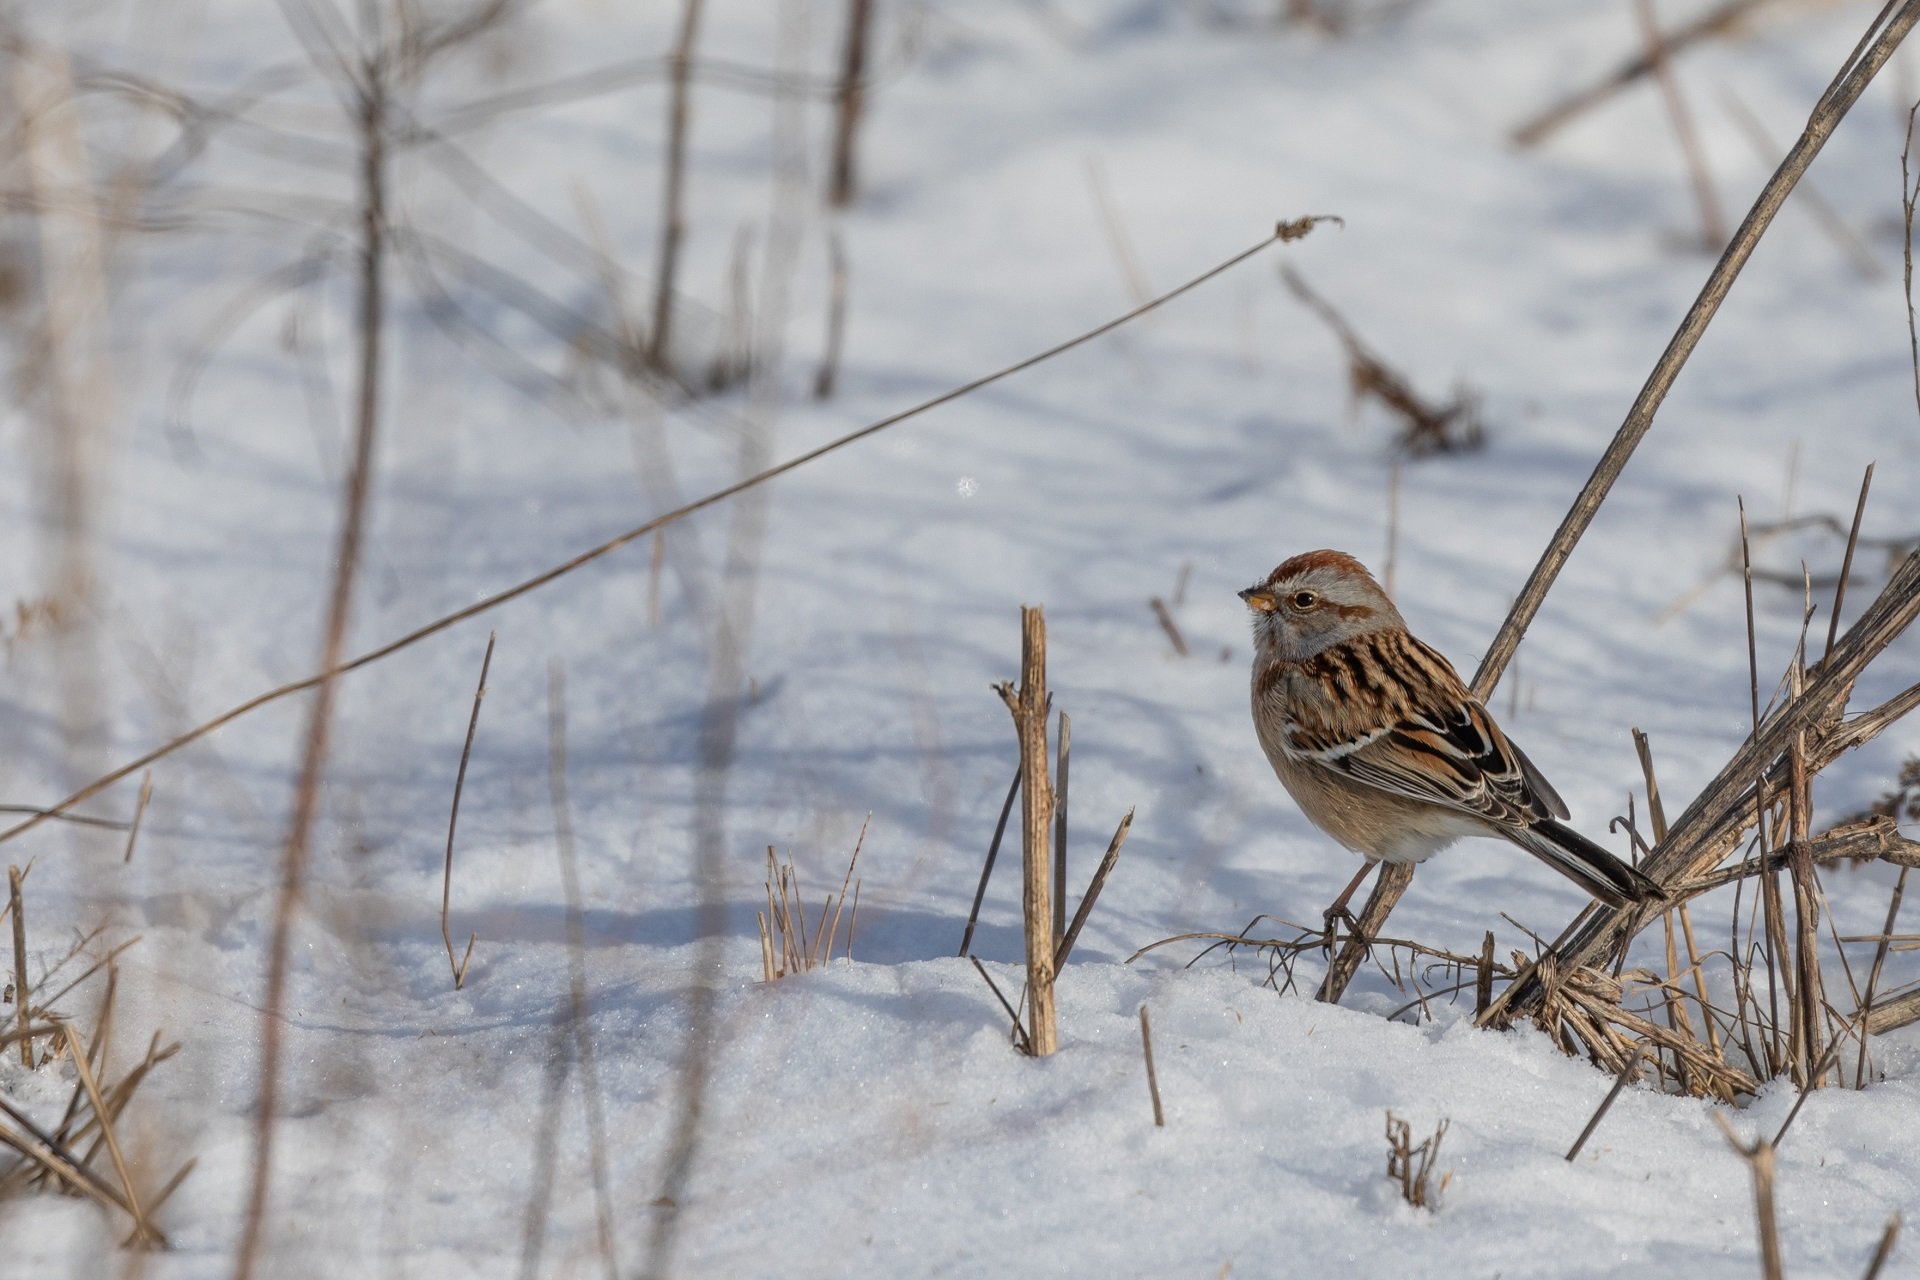 An American Tree Sparrow is perched above the snow.